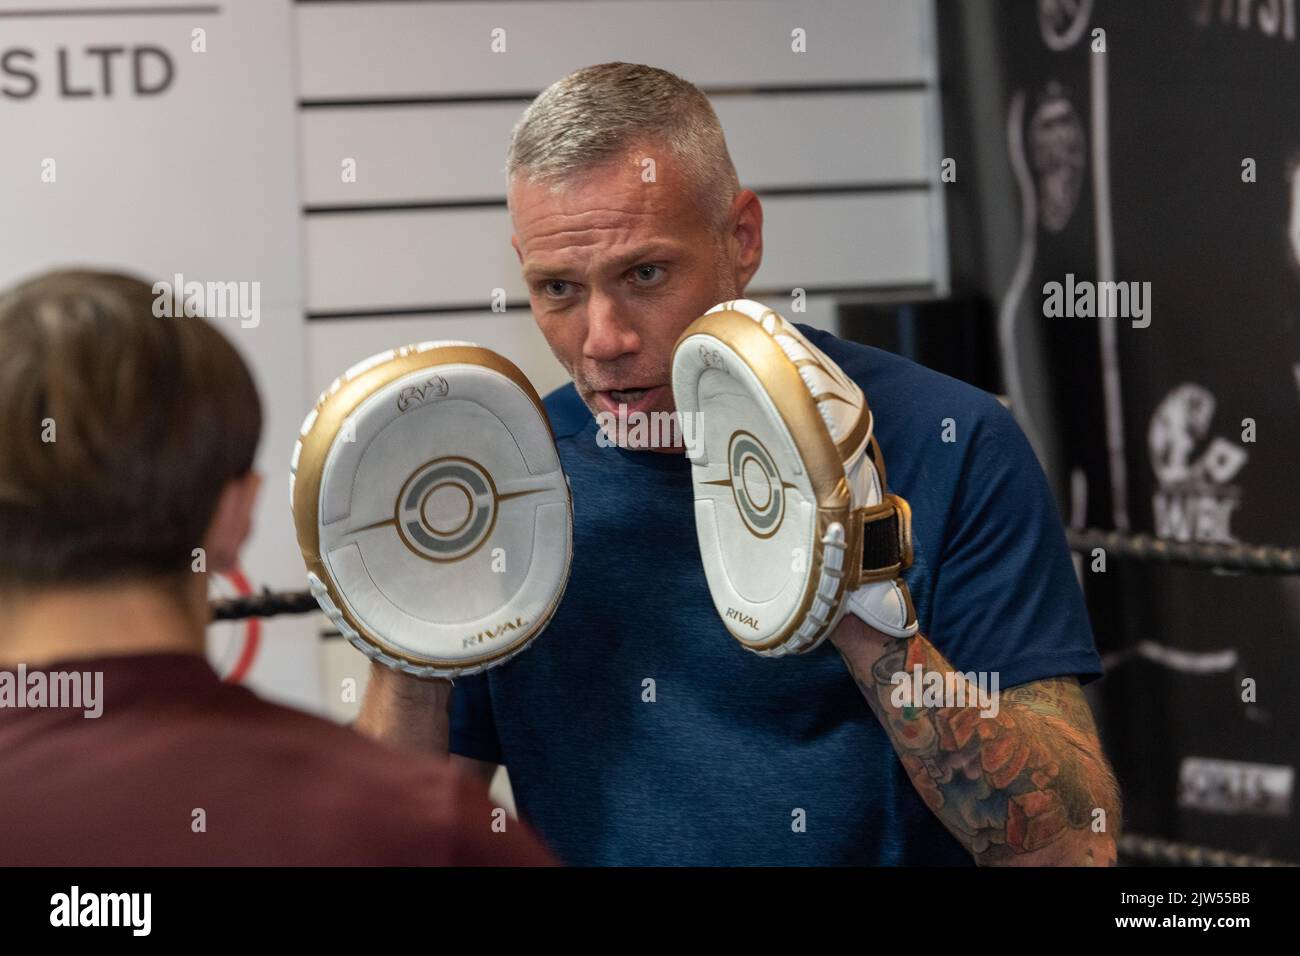 Brentwood Essex 3rd September 2022 Thomas Skinner (The Apprentice and Celebrity Master Chief) opens his latest business venture, the Bosh Gym in Brentwood Essex UK. Chad Ouzman, a boxing instructor tries some sparing Credit: Ian Davidson/Alamy Live News Stock Photo